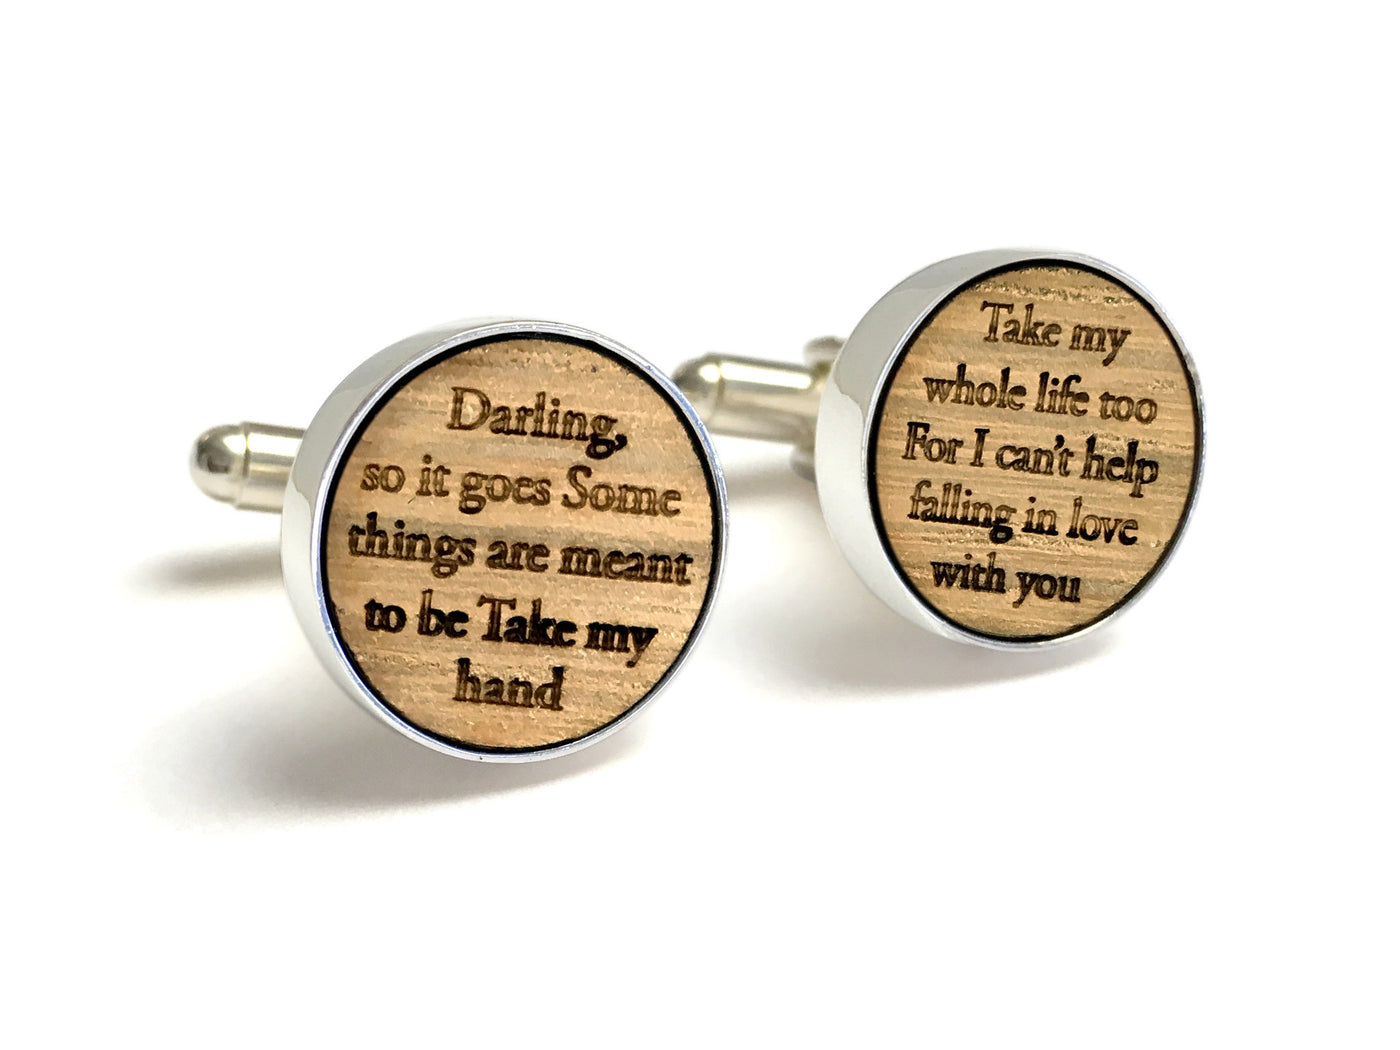 5th Anniversary Gifts For Him - Whiskey Wood Cufflinks With Wedding Song